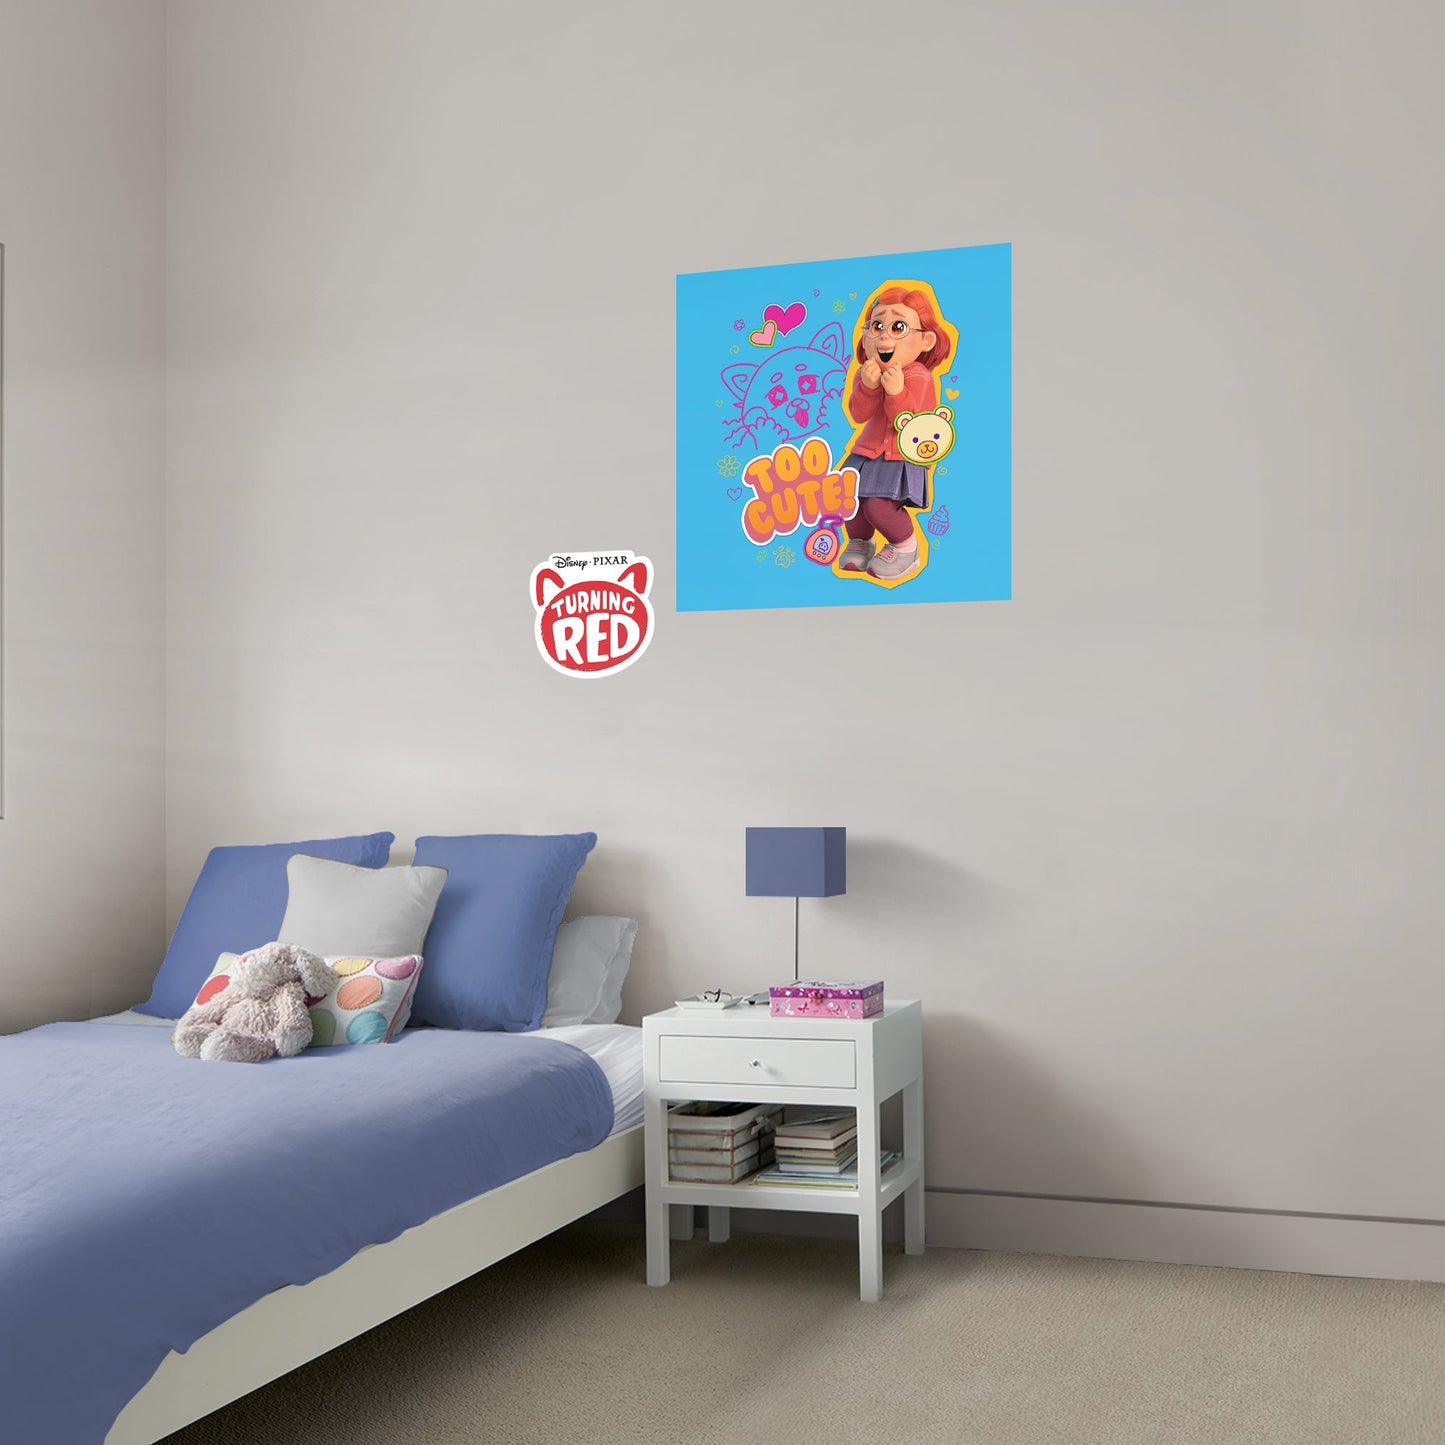 Turning Red: Meilin Too Cute Poster - Officially Licensed Disney Removable Adhesive Decal